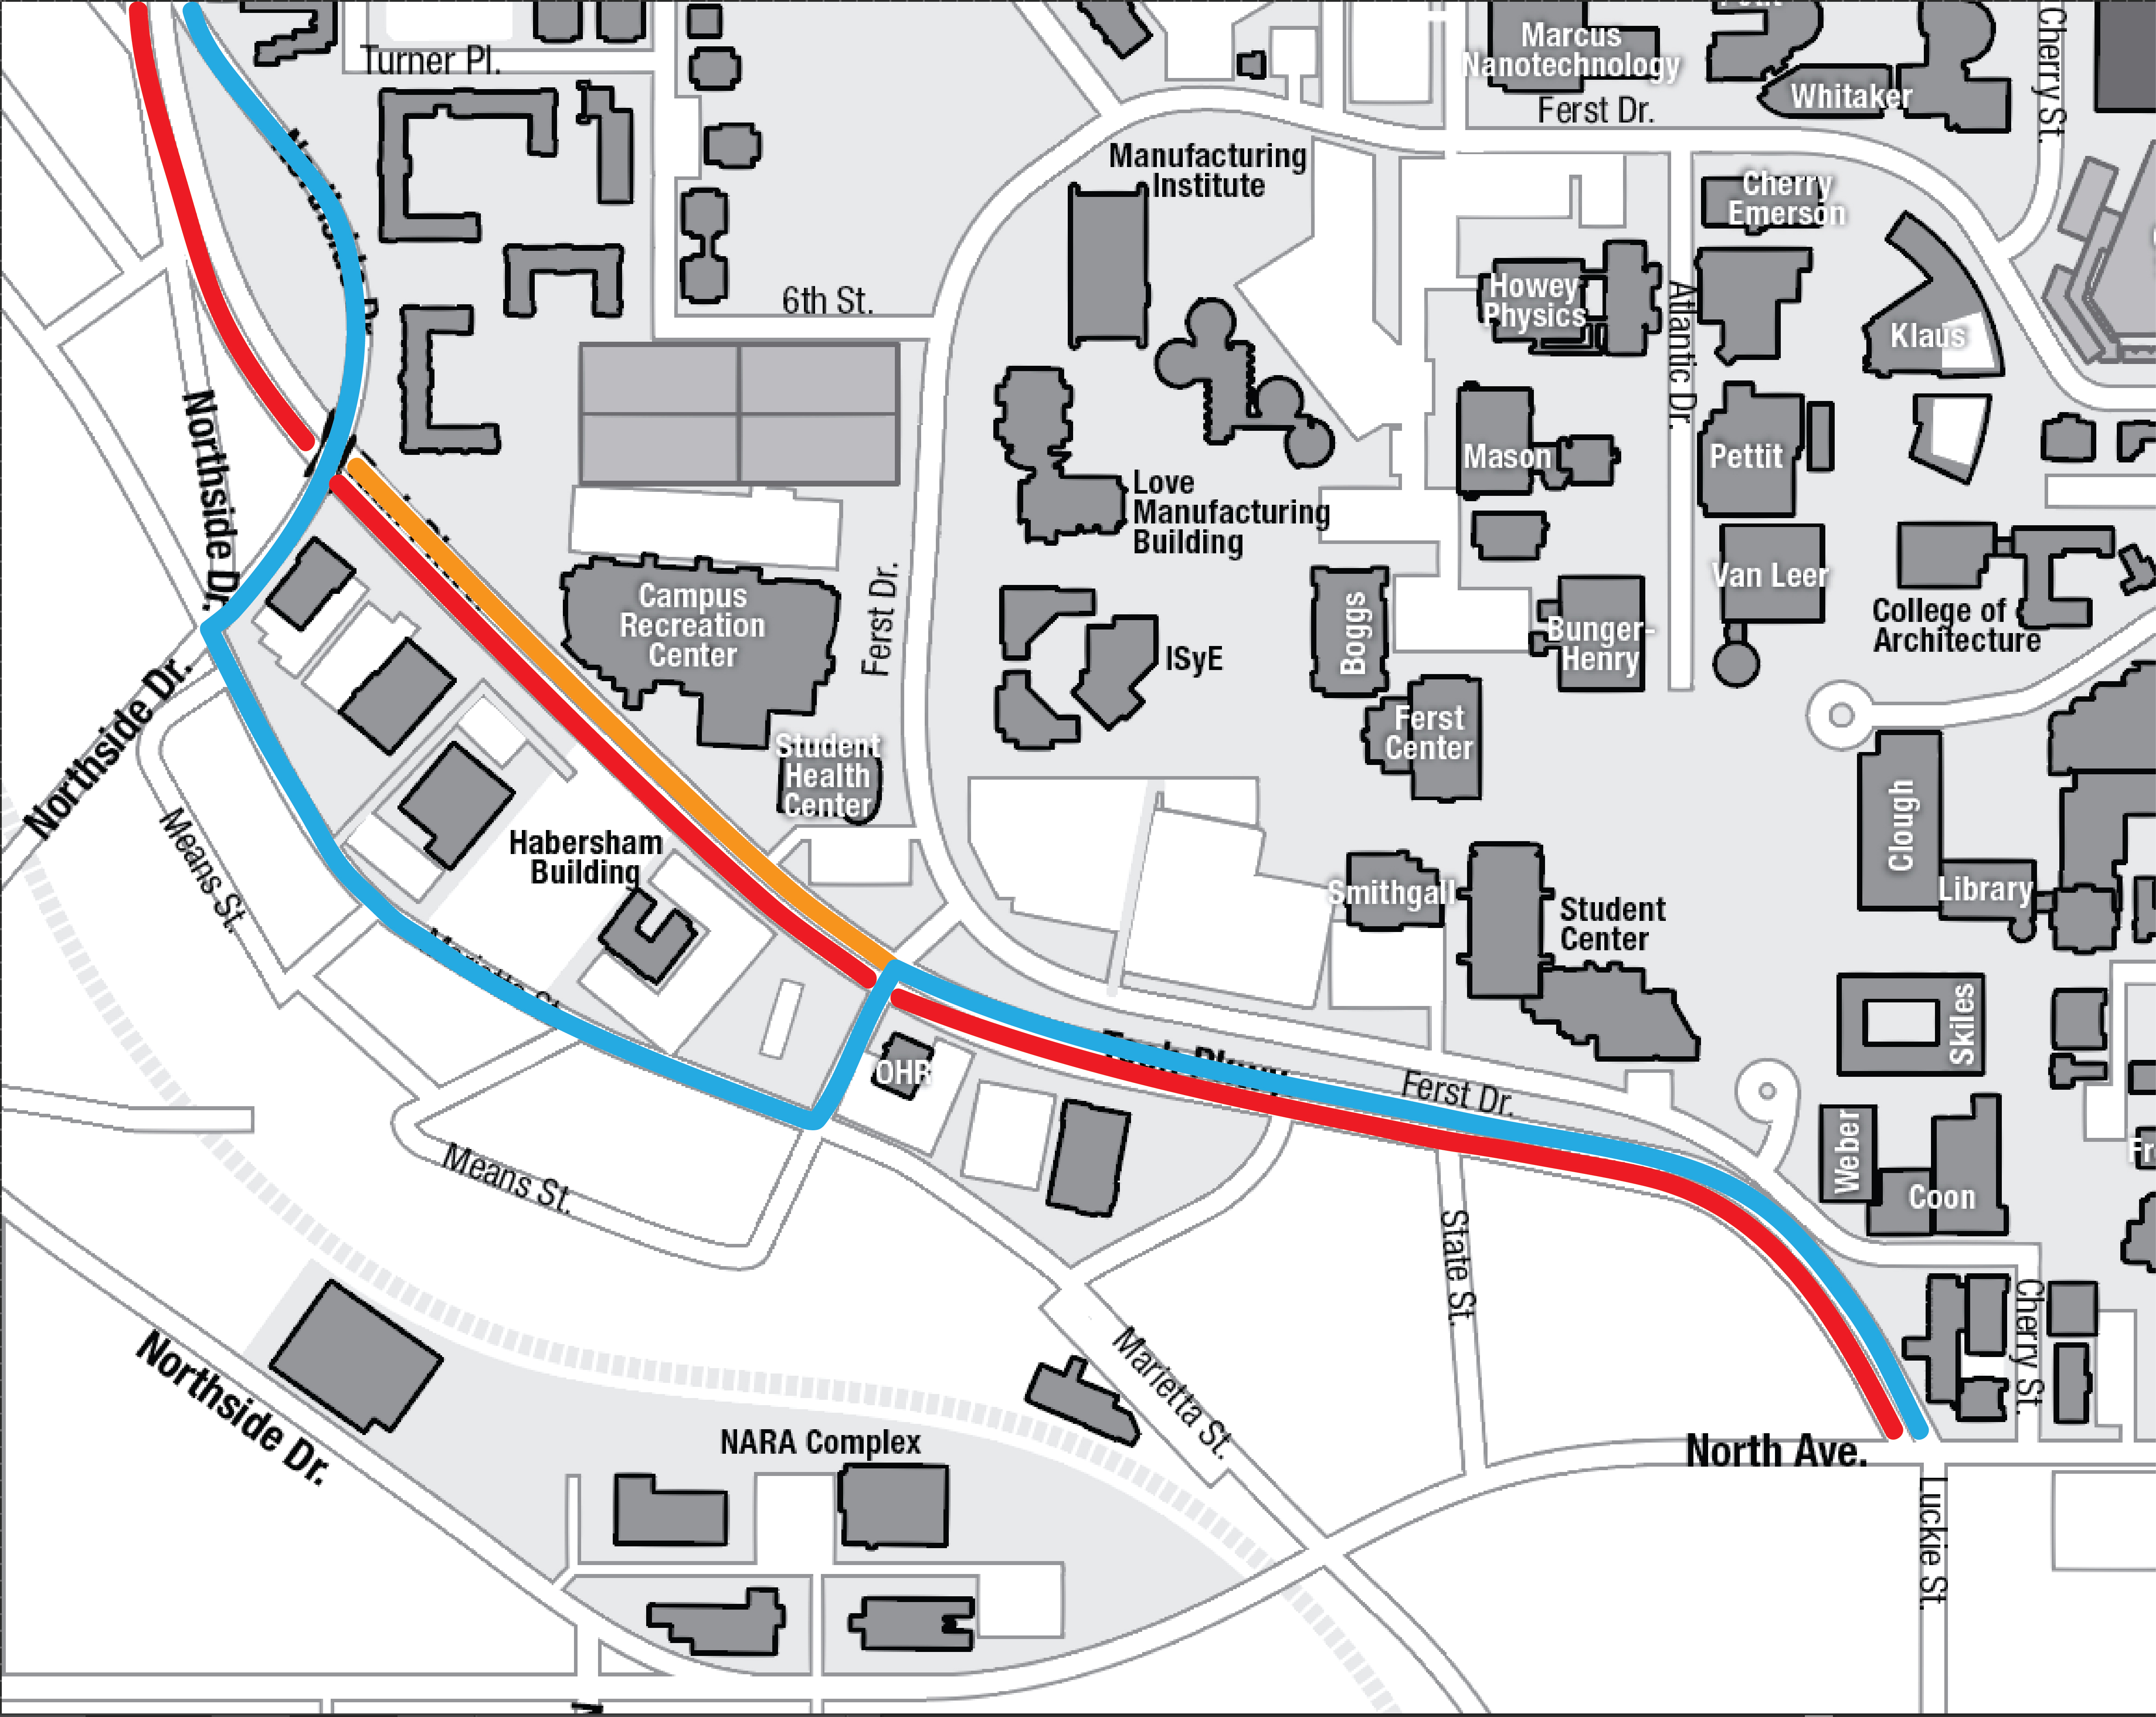 Tech Parkway traffic re-routing beginning October 3. The orange indicates where traffic is closed for northbound drivers. Northbound traffic should follow the blue route to Northside Drive. Southband traffic will continue via the path in red. 